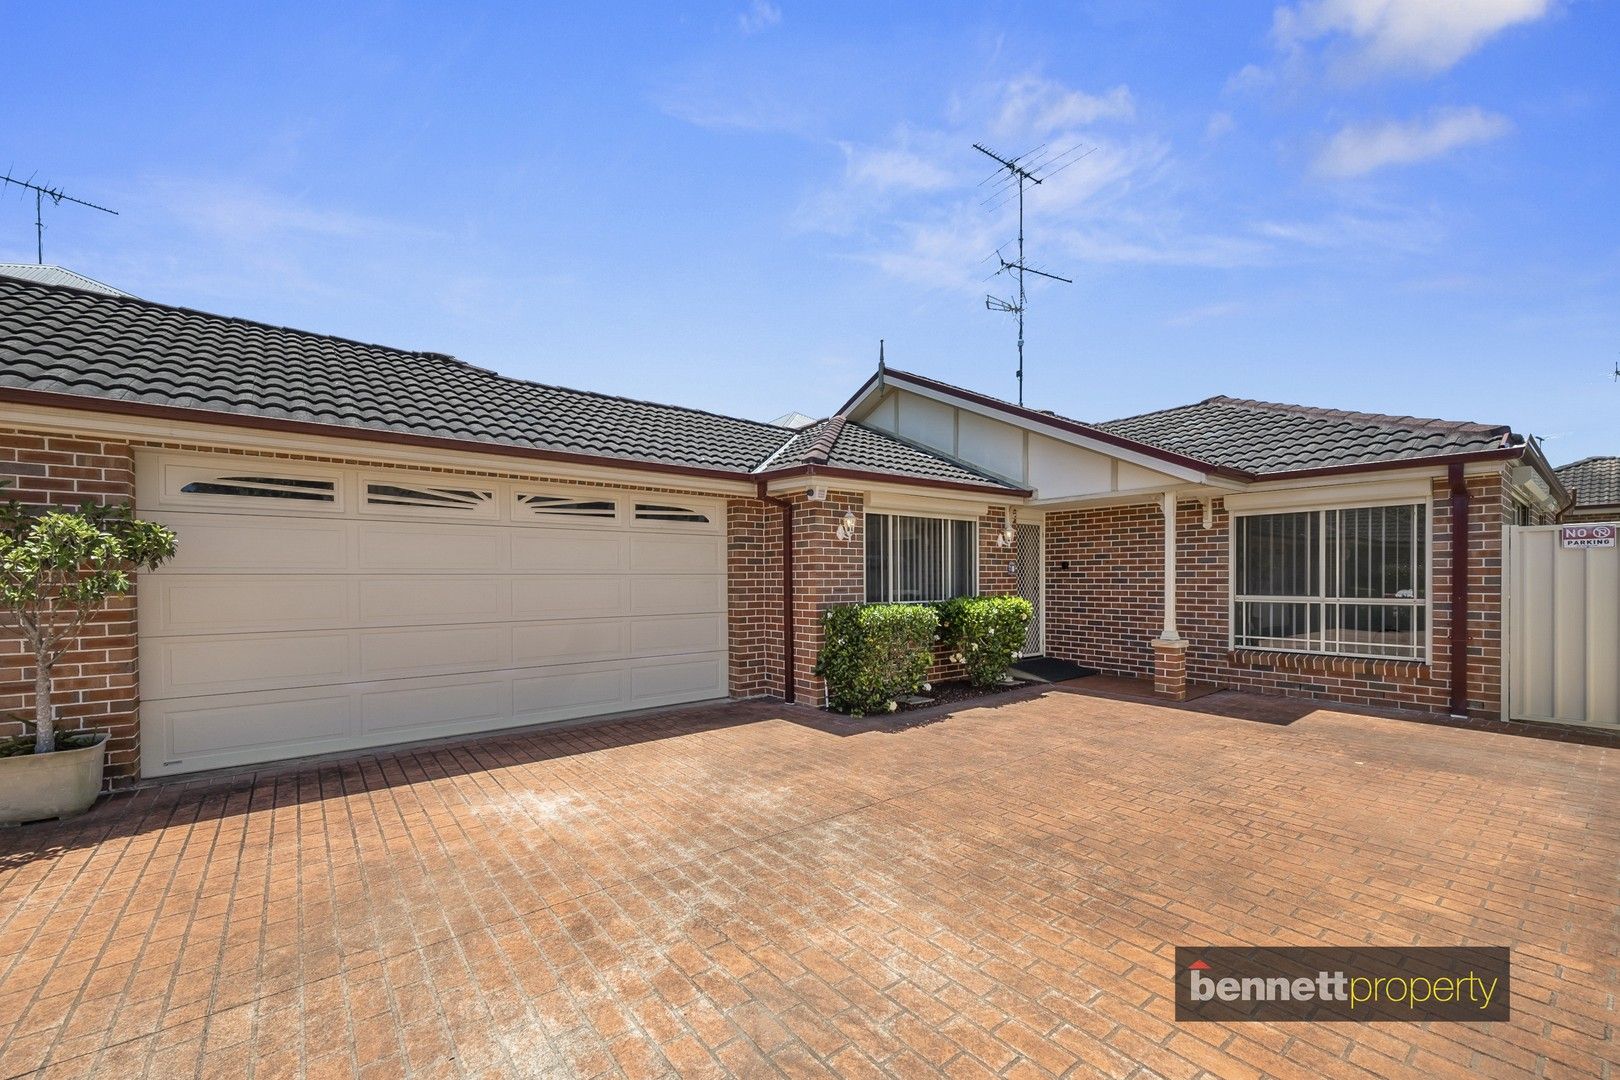 3 bedrooms House in 2/28 Paget Street RICHMOND NSW, 2753